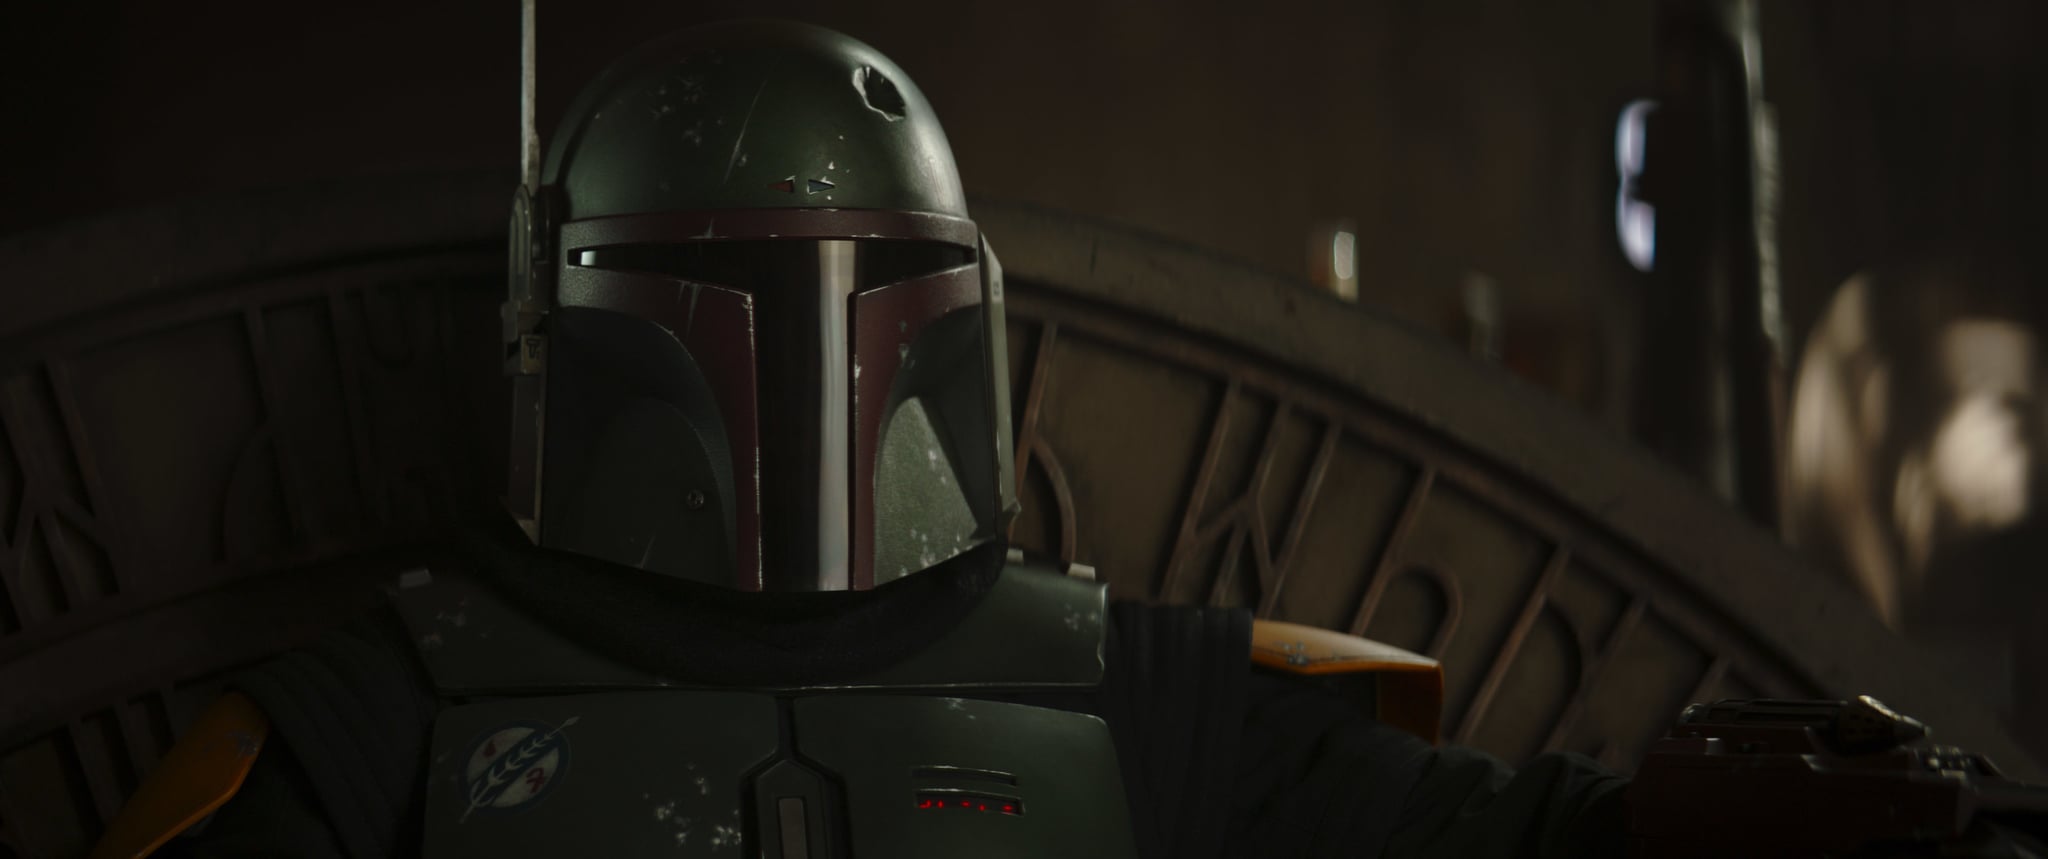 When Does Disney S The Book Of Boba Fett Take Place In The Star Wars Timeline Disney S The Book Of Boba Fett Is Premiering Soon So Here S What To Know Popsugar